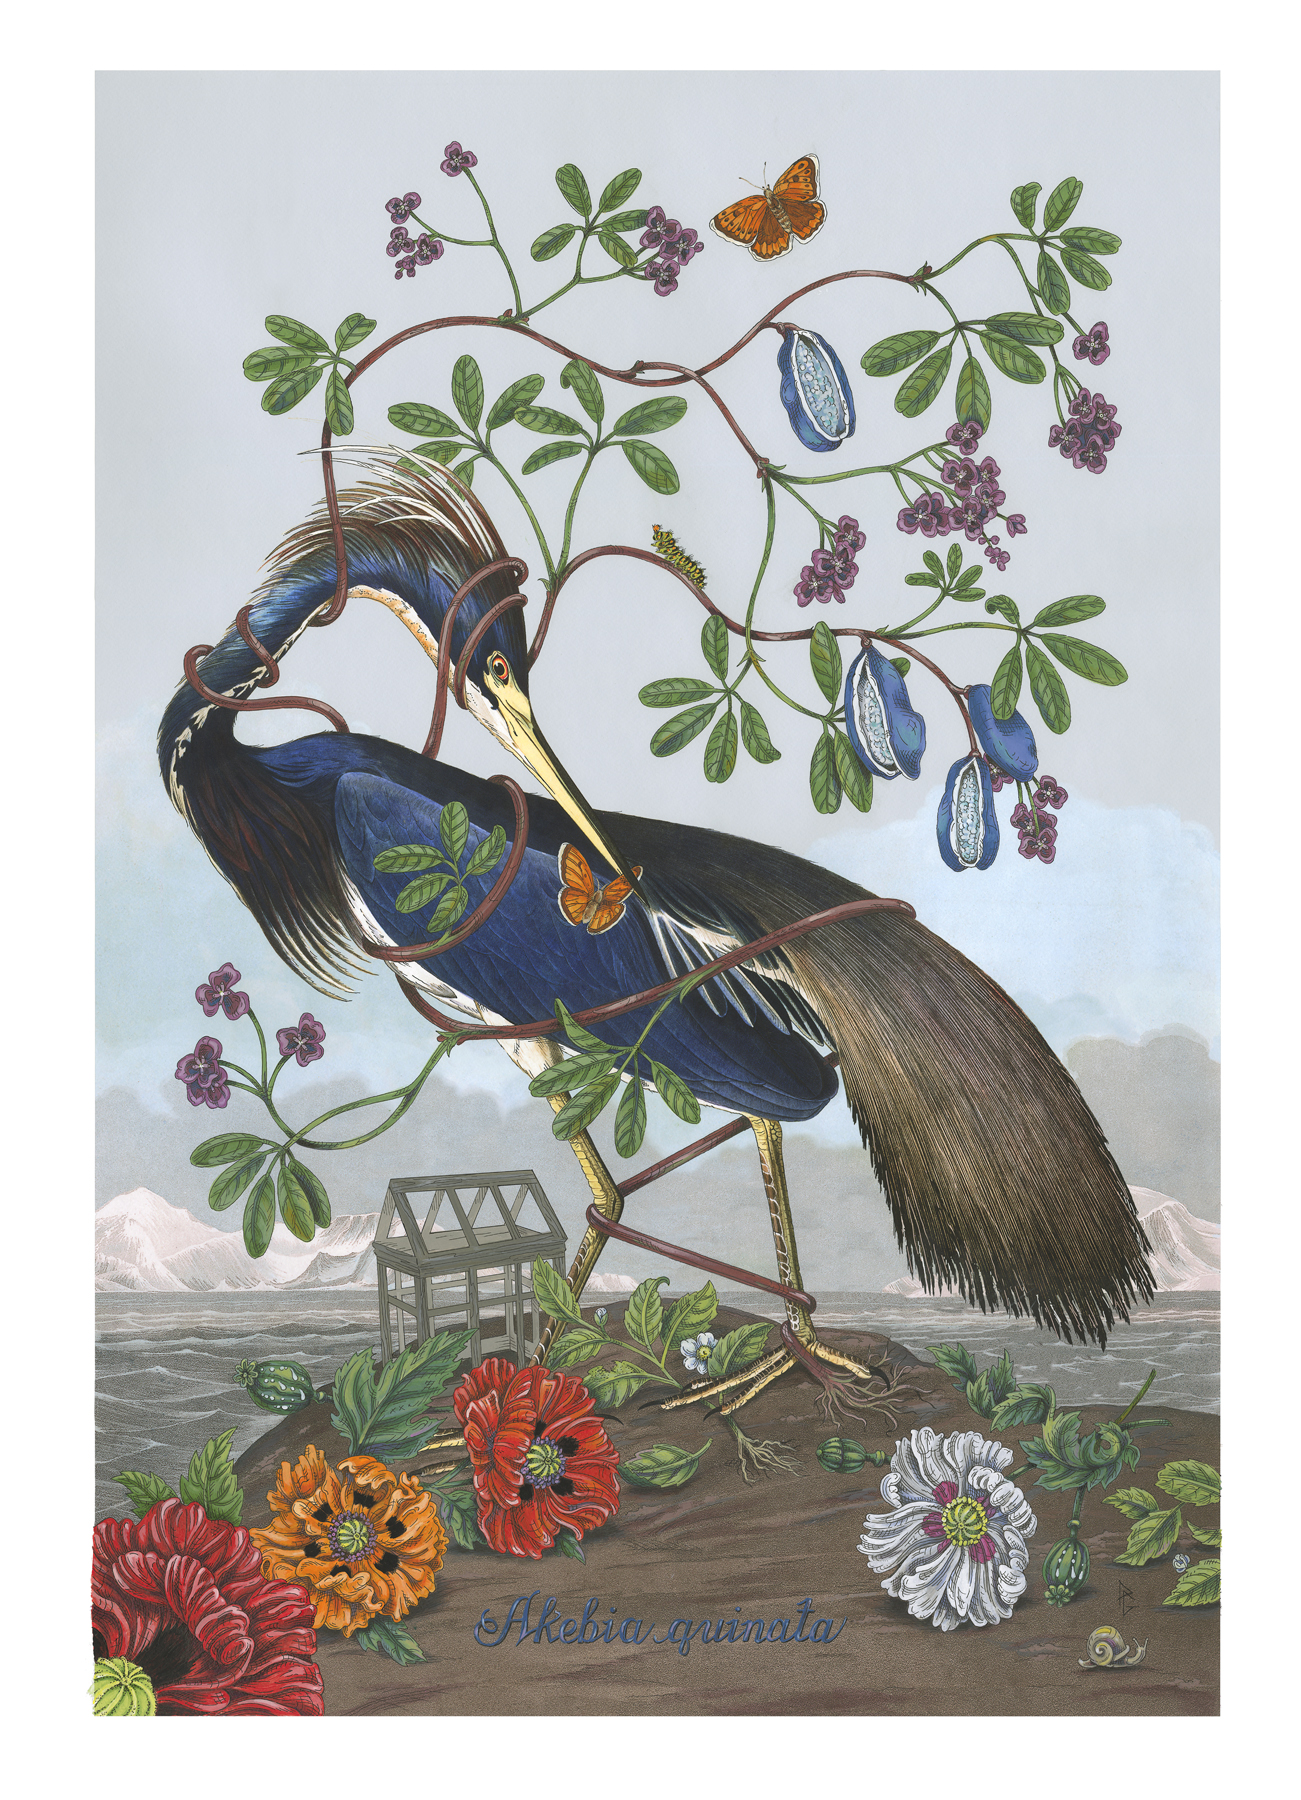 

											Penelope Gottlieb</b>

											<em>
												Still Lives  New work by Penelope Gottlieb</em> 

											<h4>
												July 29 - September 23, 2022											</h4>

		                																																													<i>Akebia quinata,</i>  
																																																					acrylic and ink over a digital reproduction of an Audubon print, 
																																								38 x 26 inches 
																								
		                				